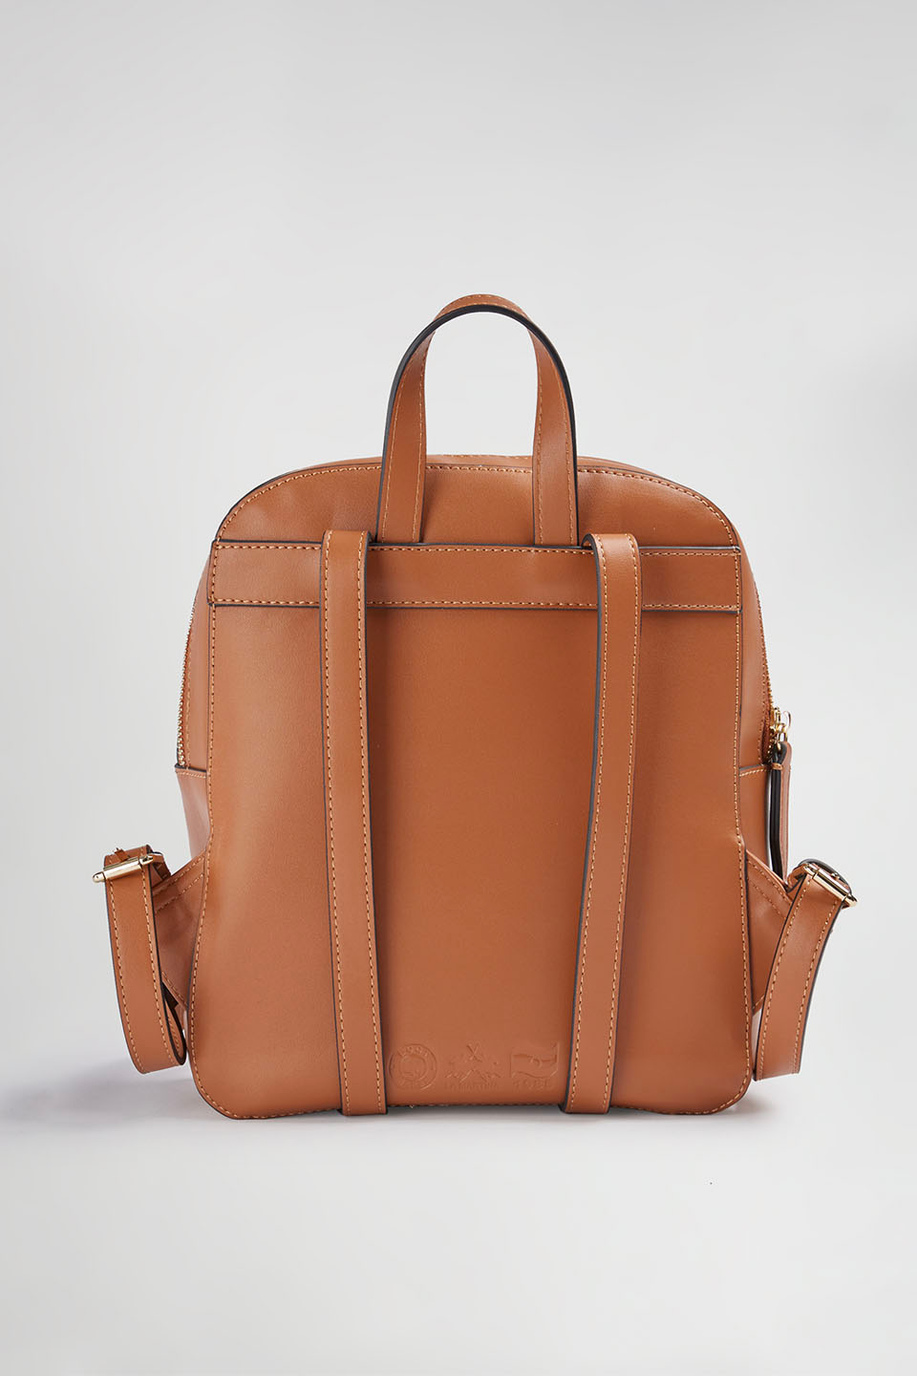 PU leather backpack - Accessories Woman | La Martina - Official Online Shop